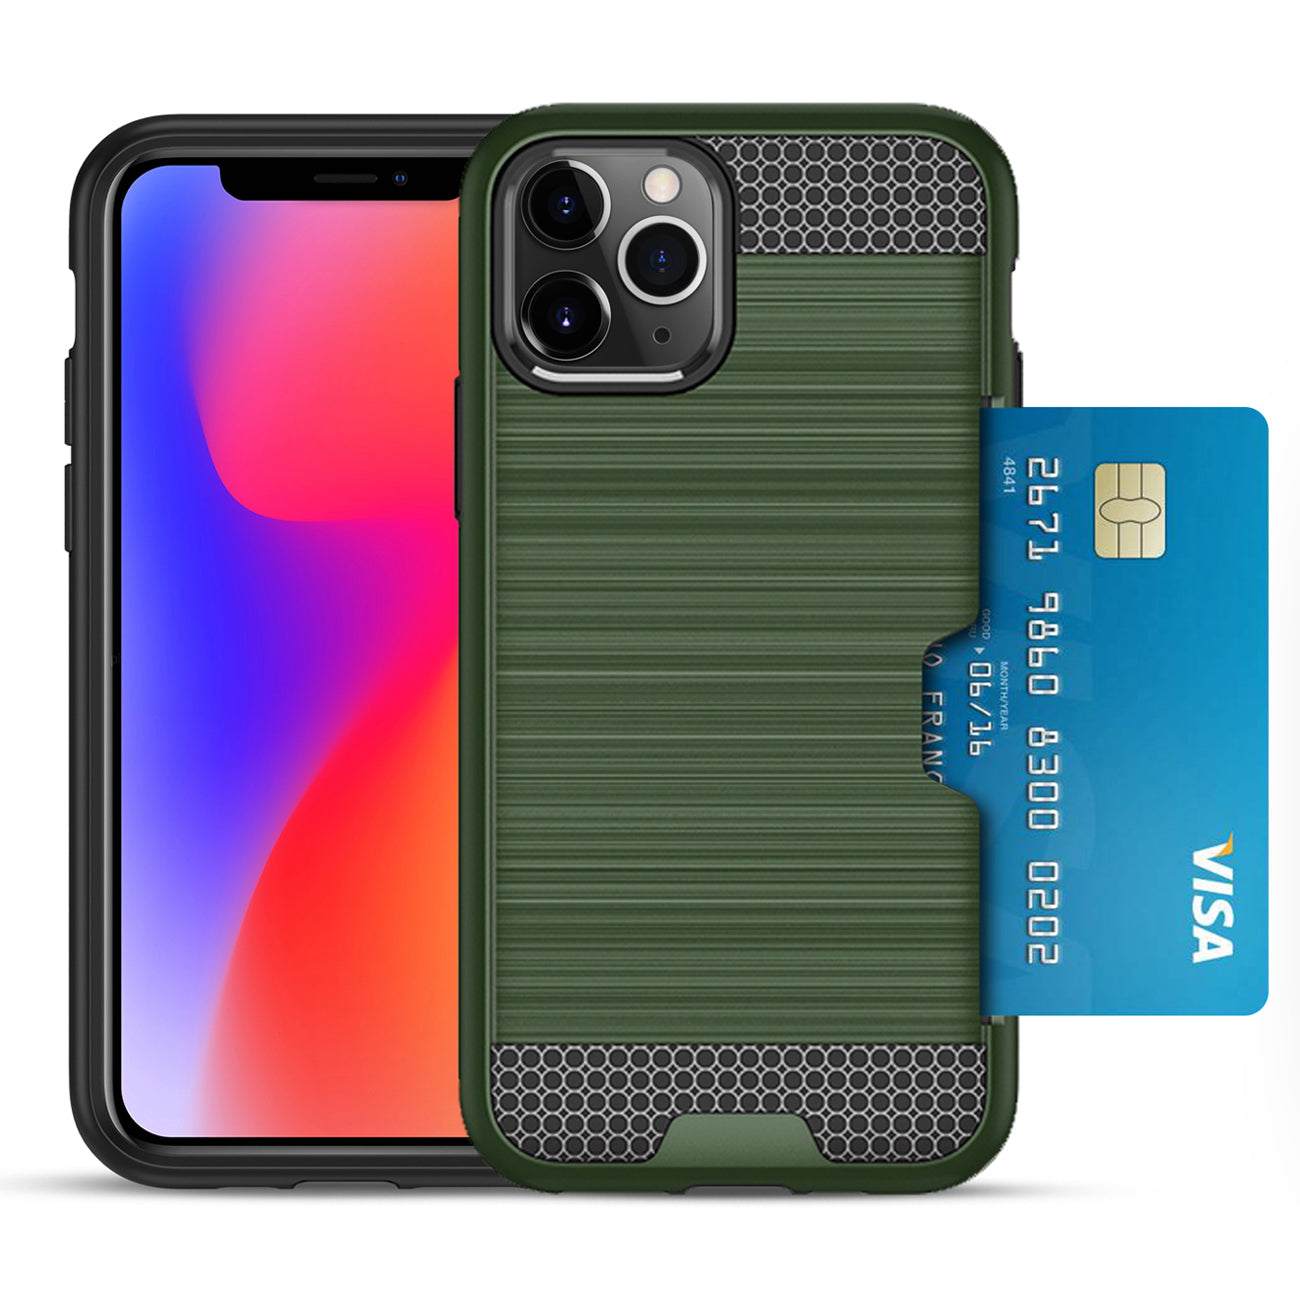 iPhone 11 PRO SLIM ARMOR HYBRID CASE WITH CARD HOLDER IN GREEN